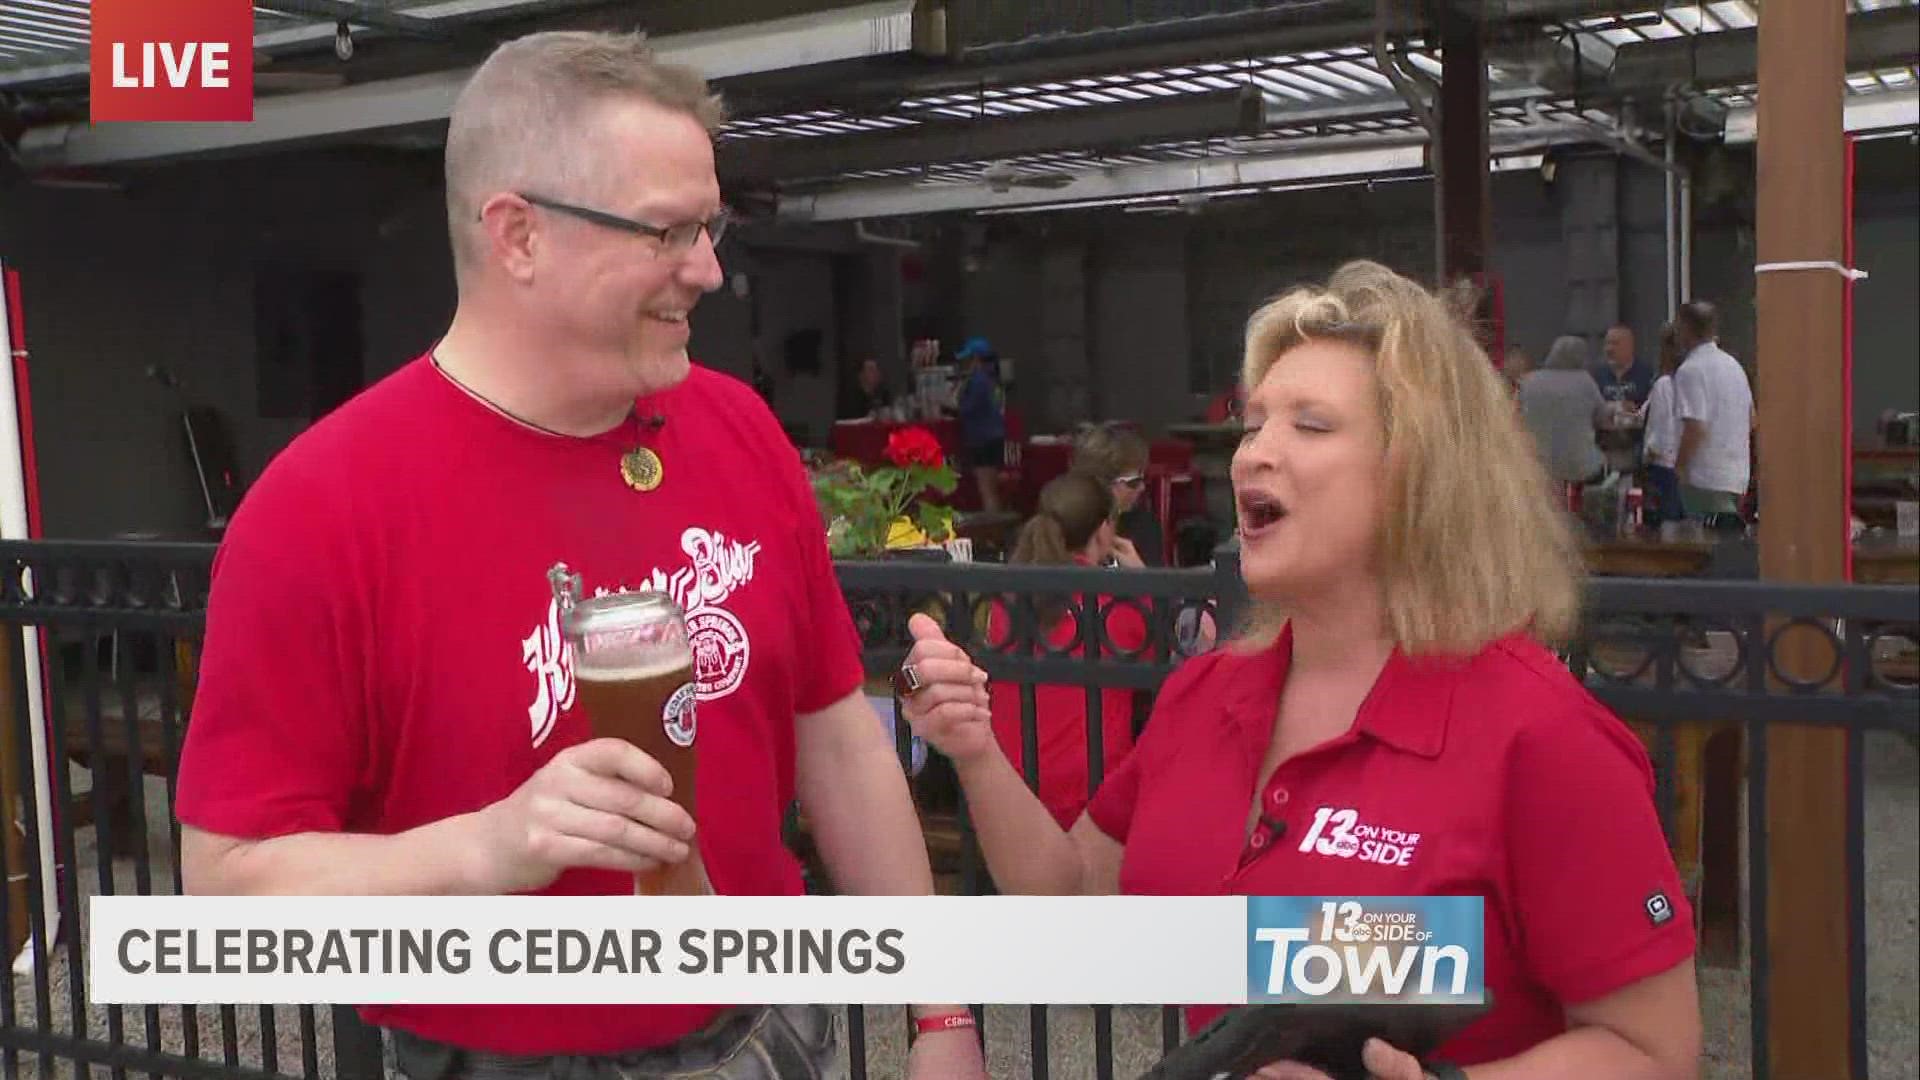 Cedar Springs Brewing Company Director of Happiness David Ringler shares his passion for beer and West Michigan.